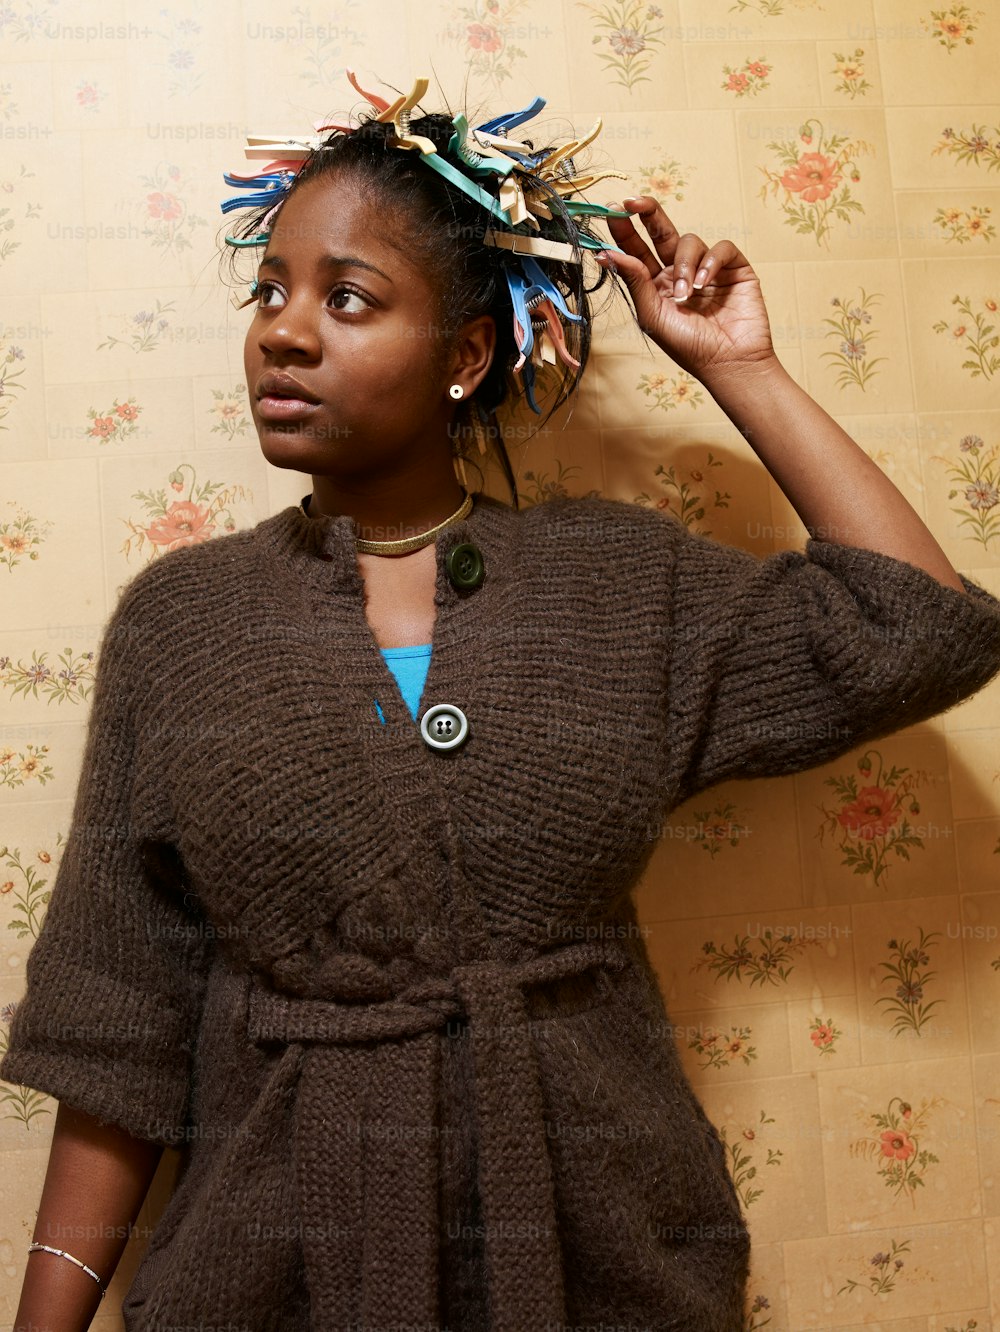 a woman wearing a brown sweater and a blue necklace